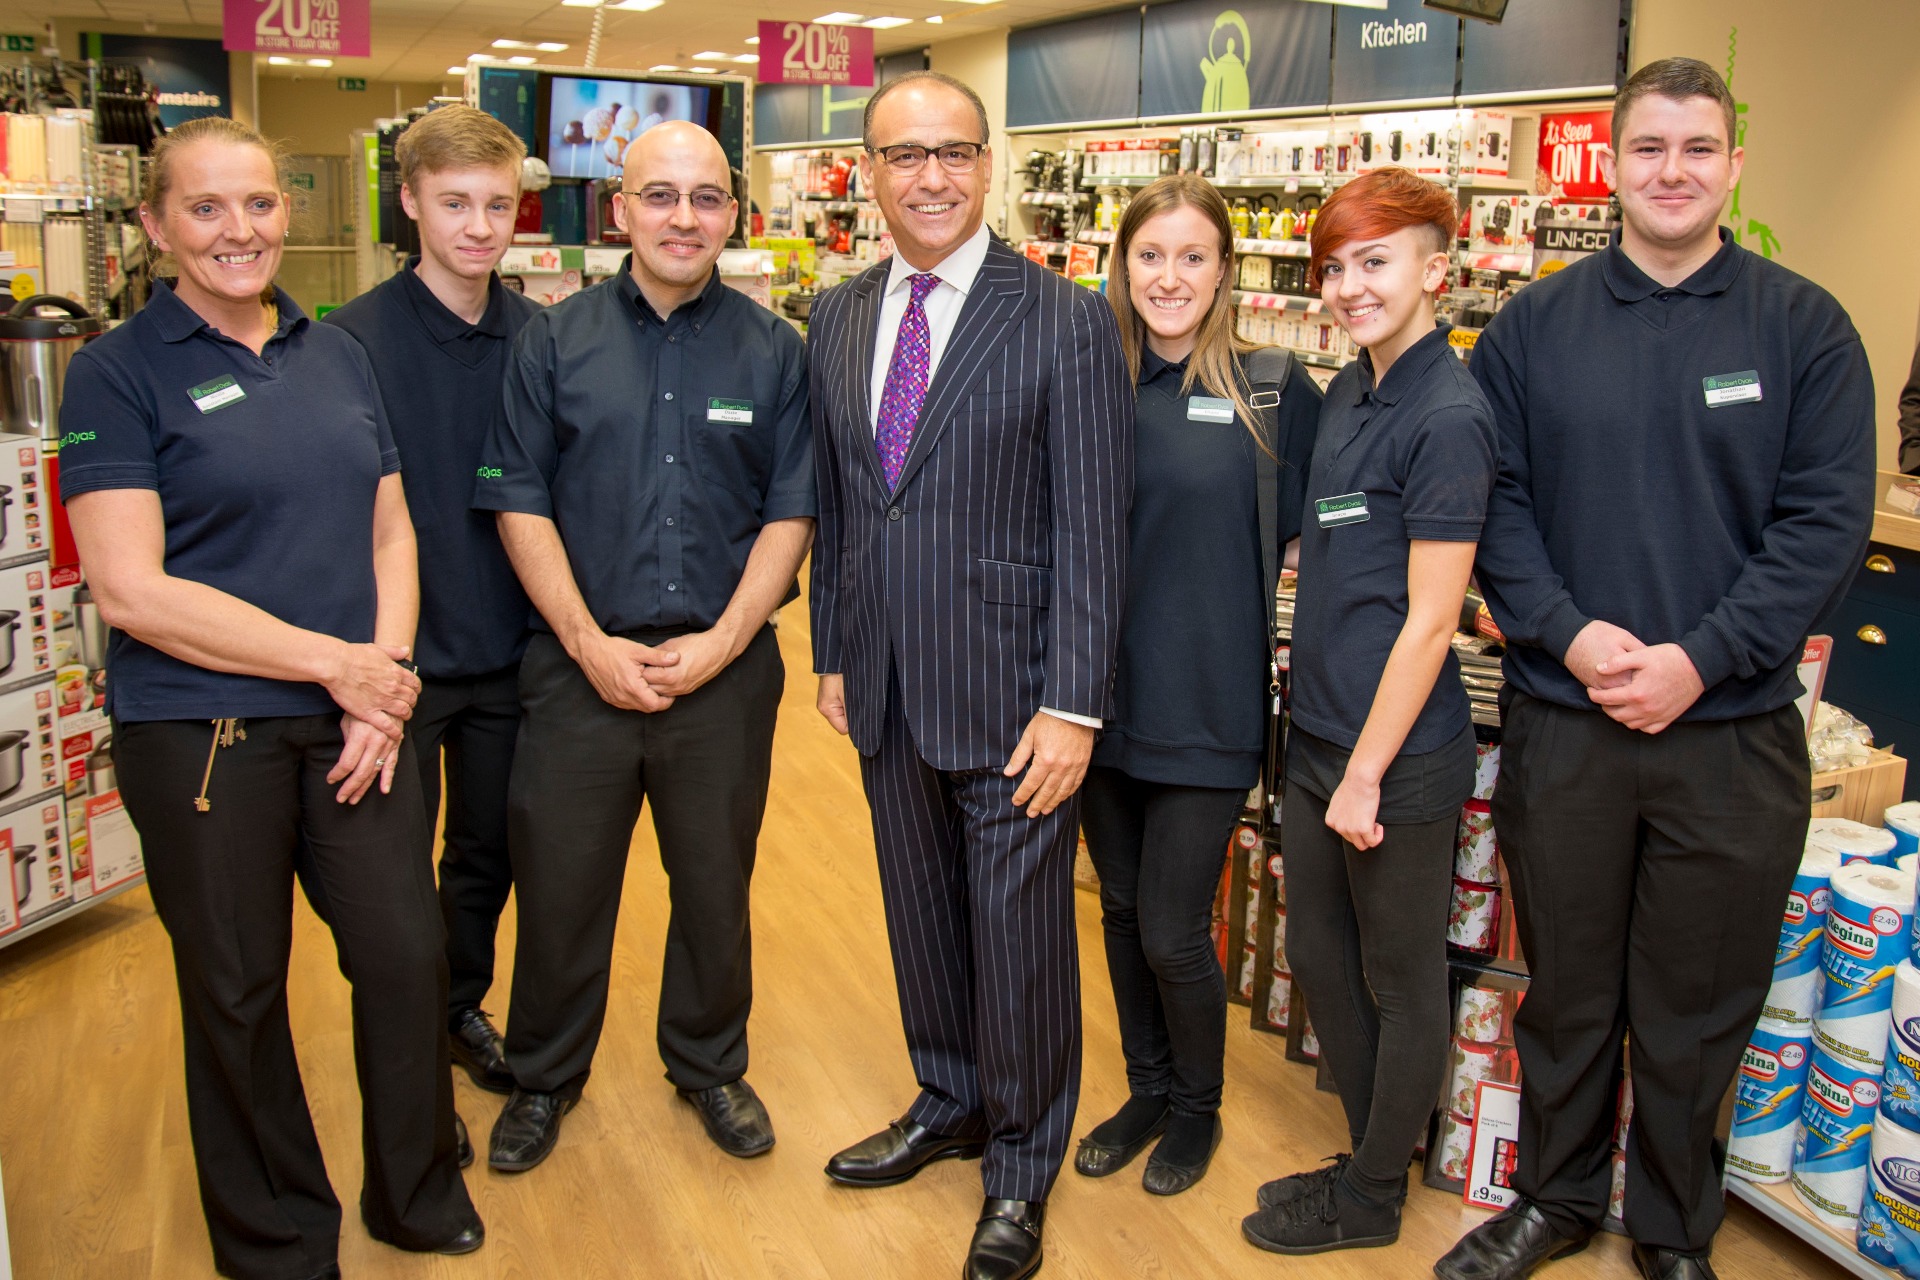 Theo Paphitis with Robert Dyas employees